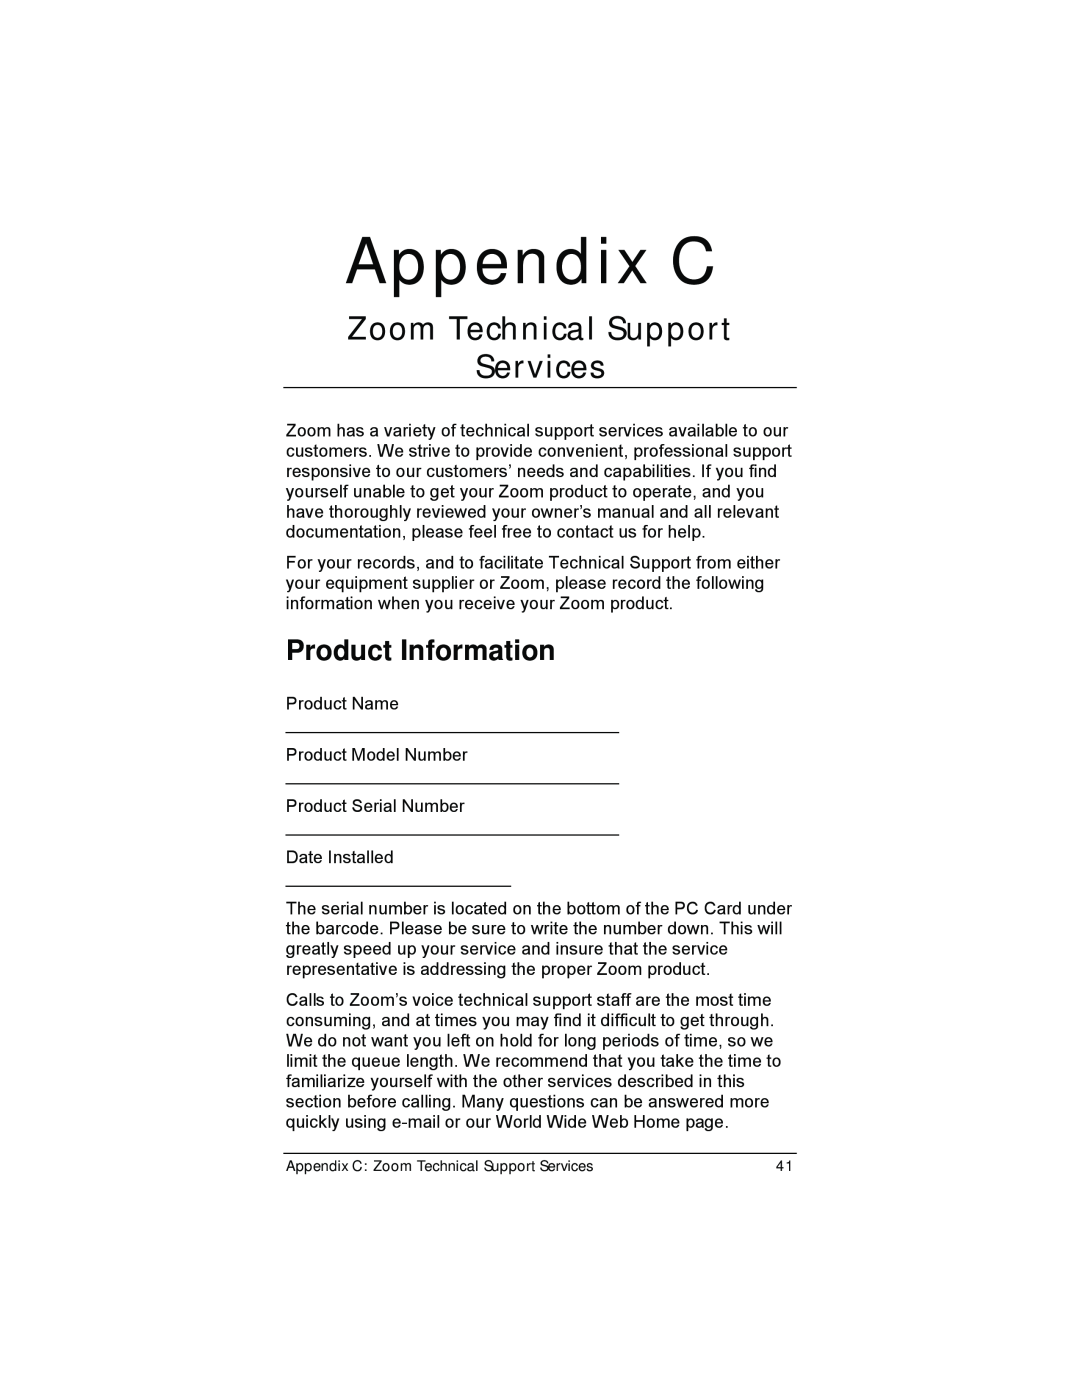 Zoom 4412A/TF manual Appendix C, Zoom Technical Support Services, Product Information 